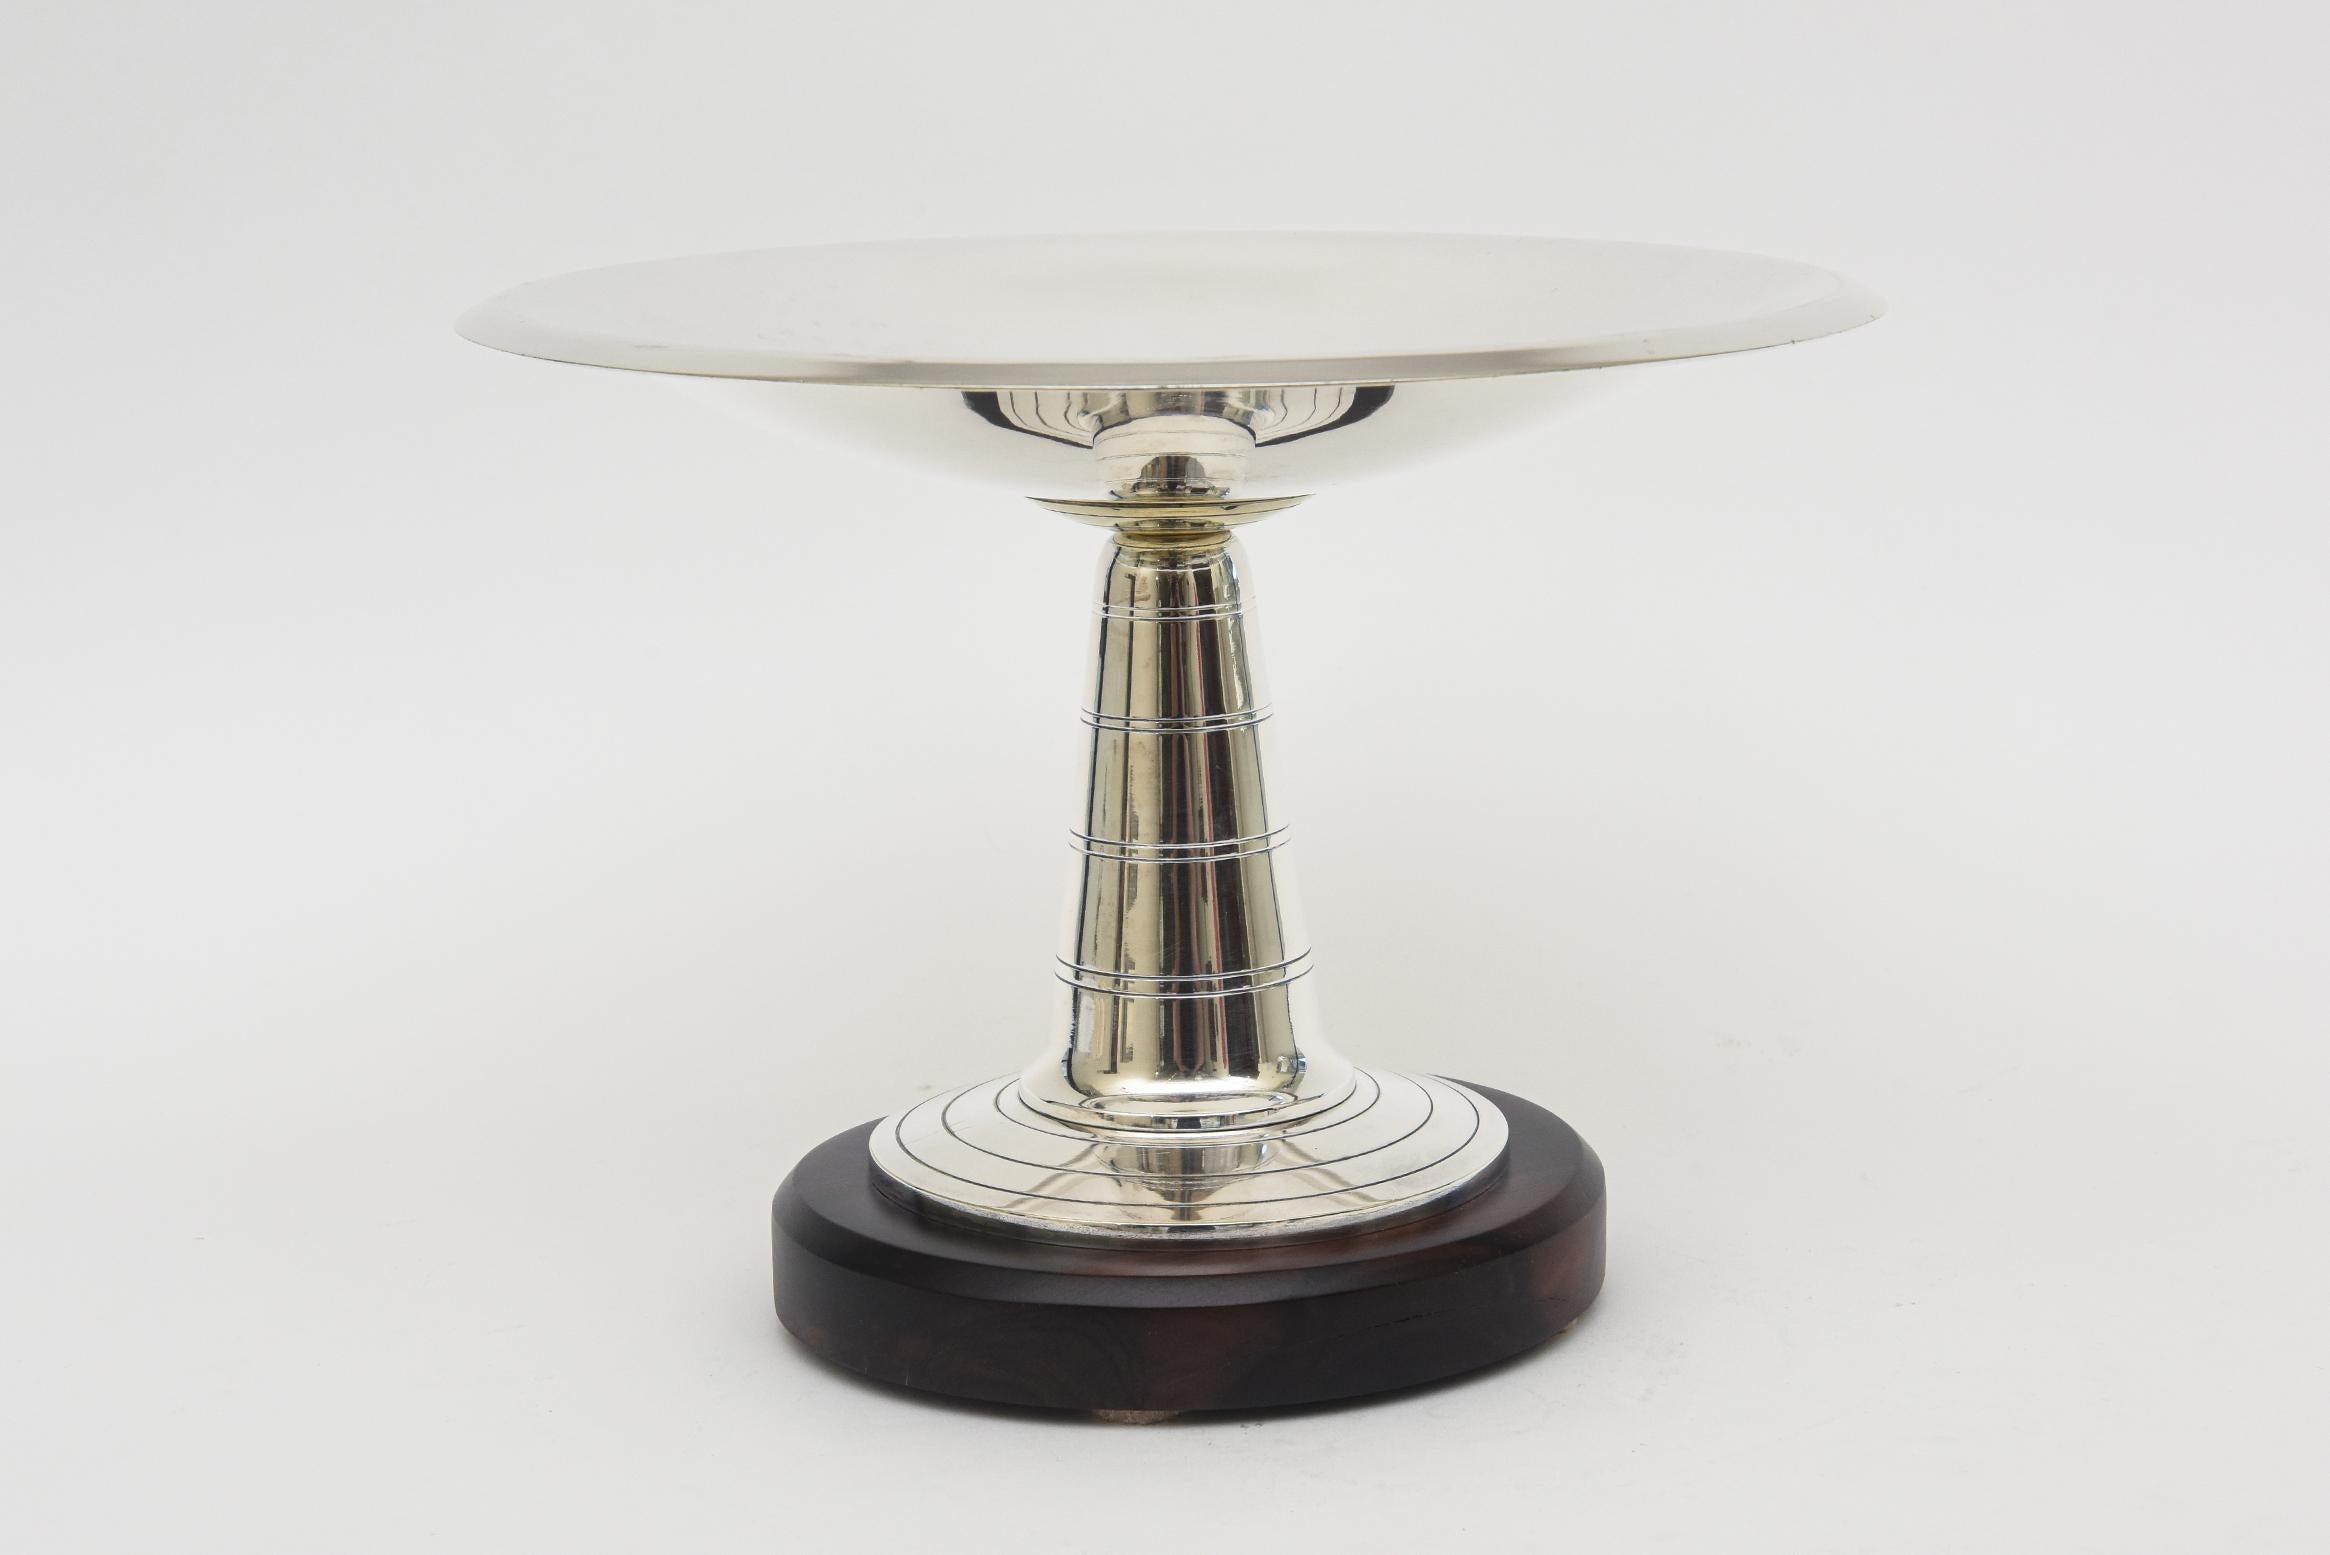 Vintage Art Deco French Silver-Plate and Rosewood Pedestal Bowl Or Serving Piece In Good Condition For Sale In North Miami, FL